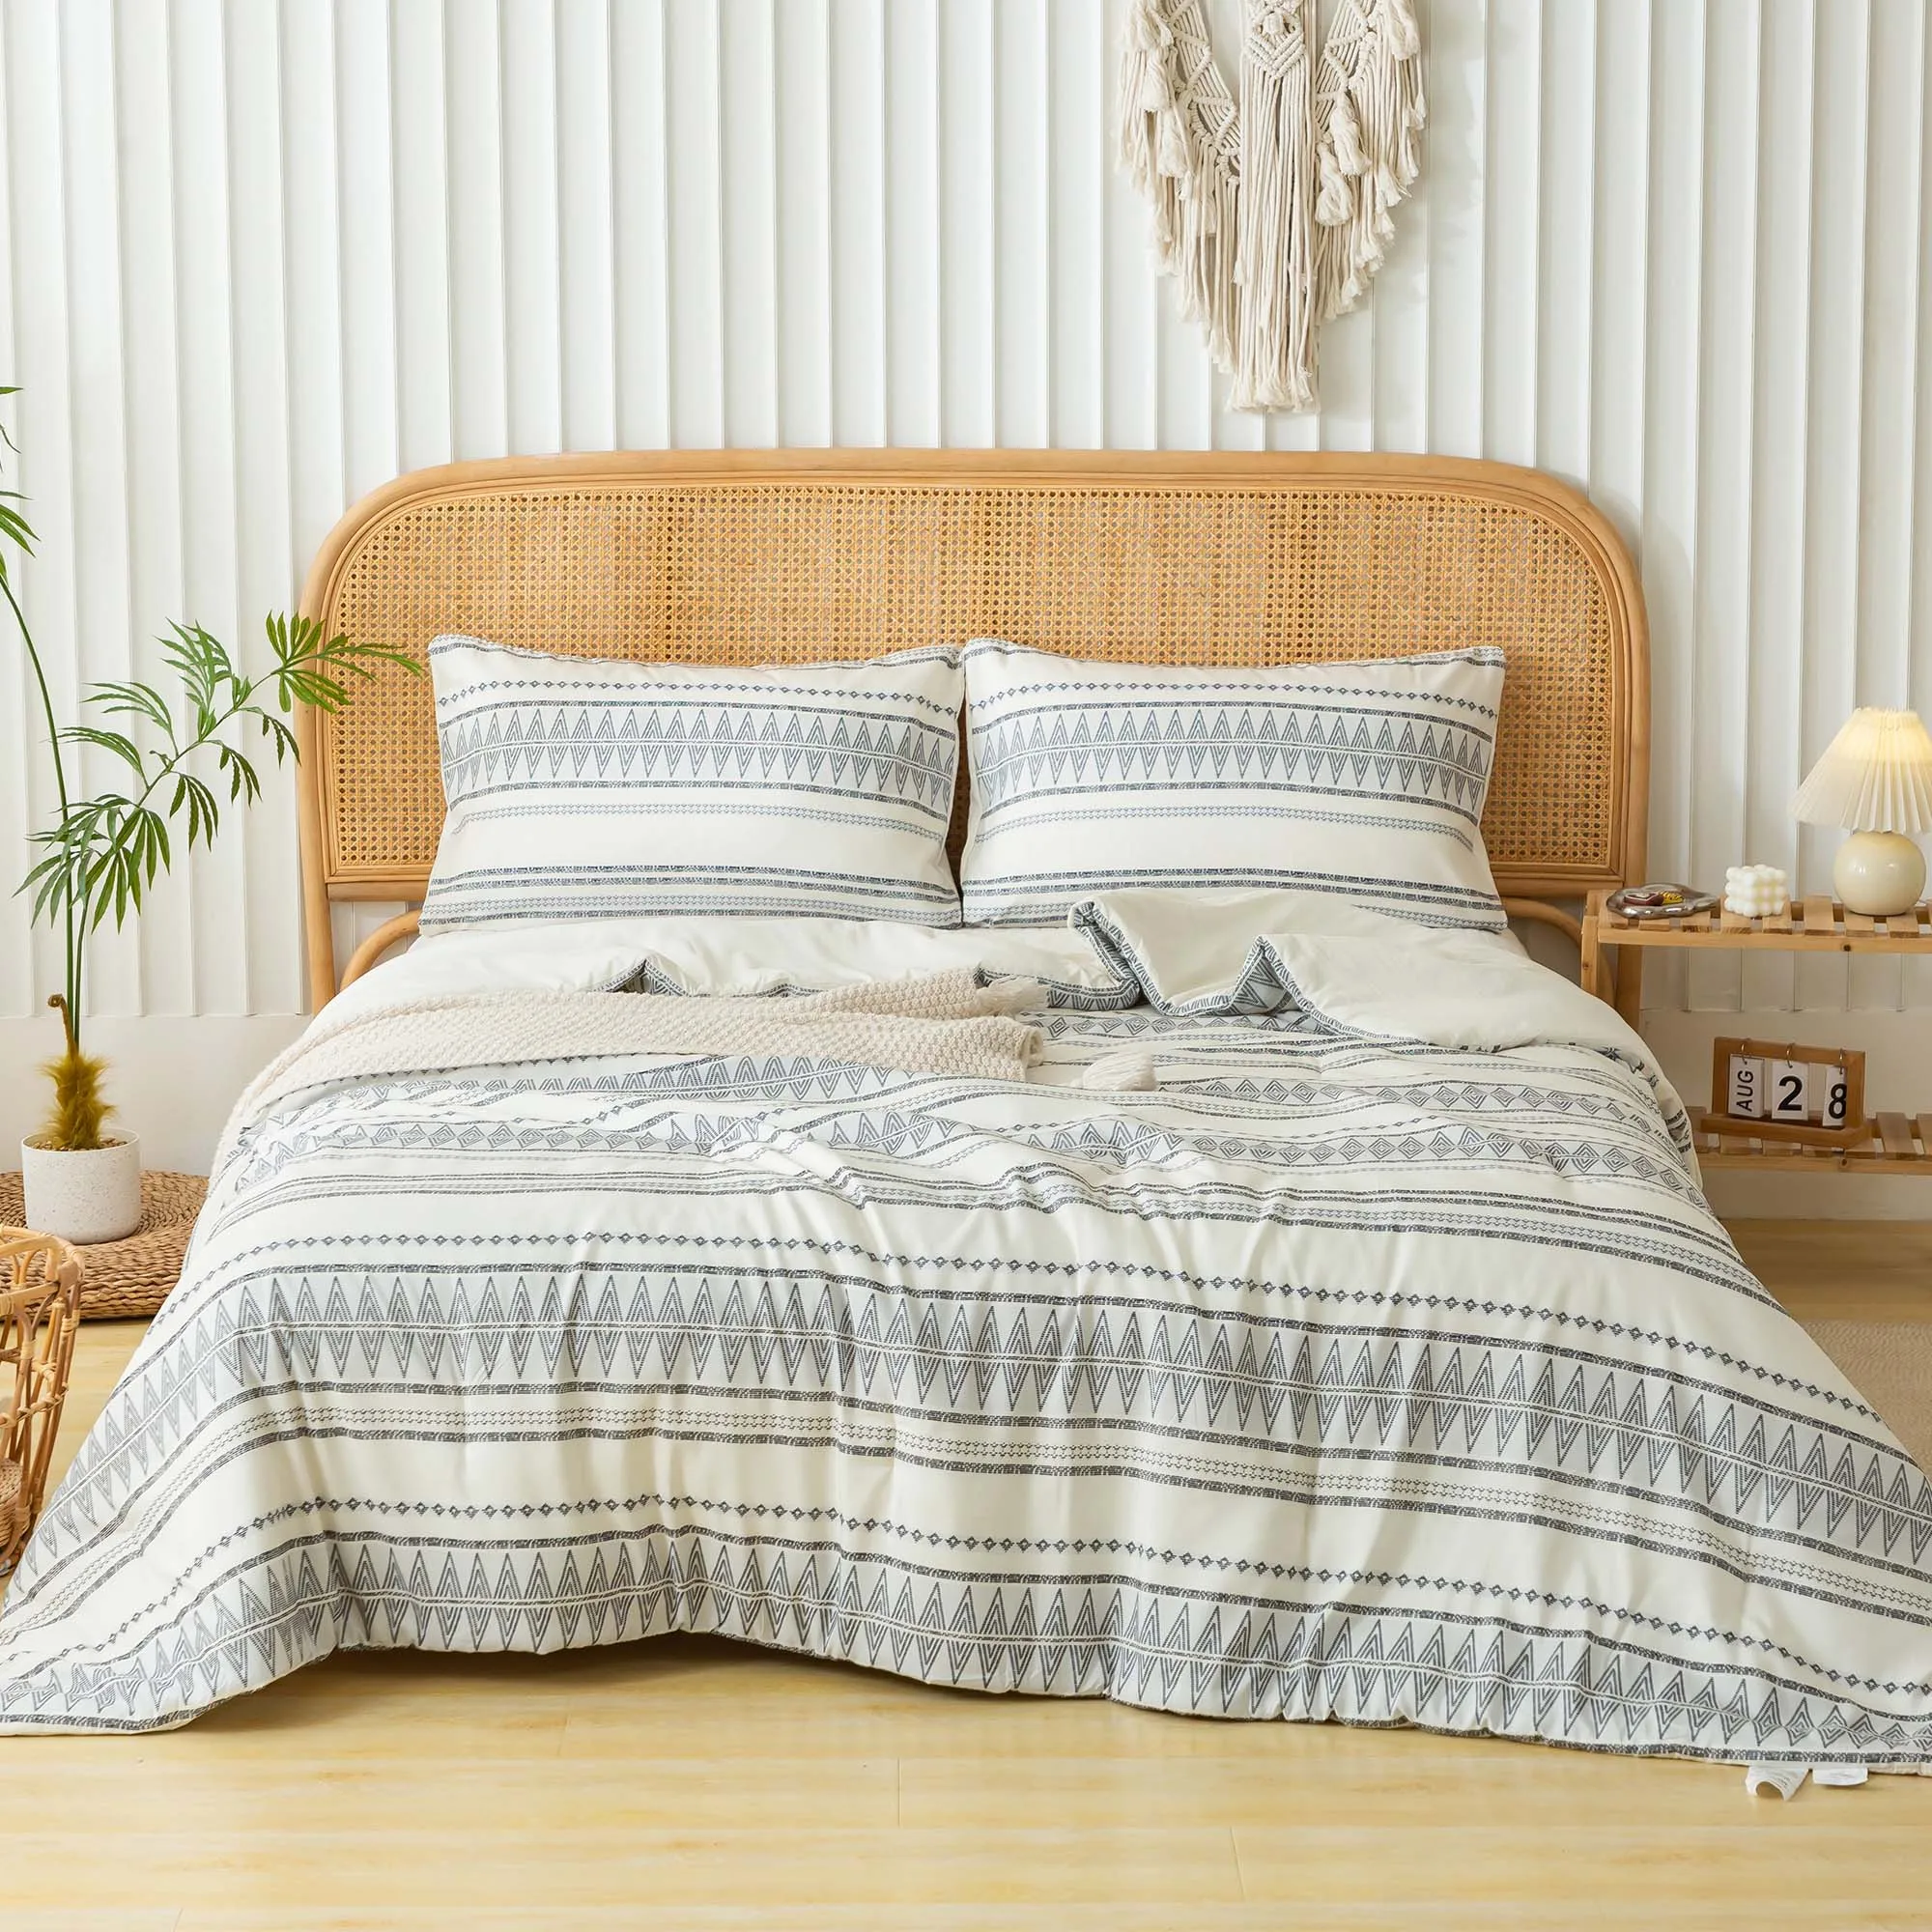 

Ultra-Soft Lightweight Brushed Bohemian Striped Pattern Bedding Quilt Down Comforter Pillowsham for All Seasons Twin Size